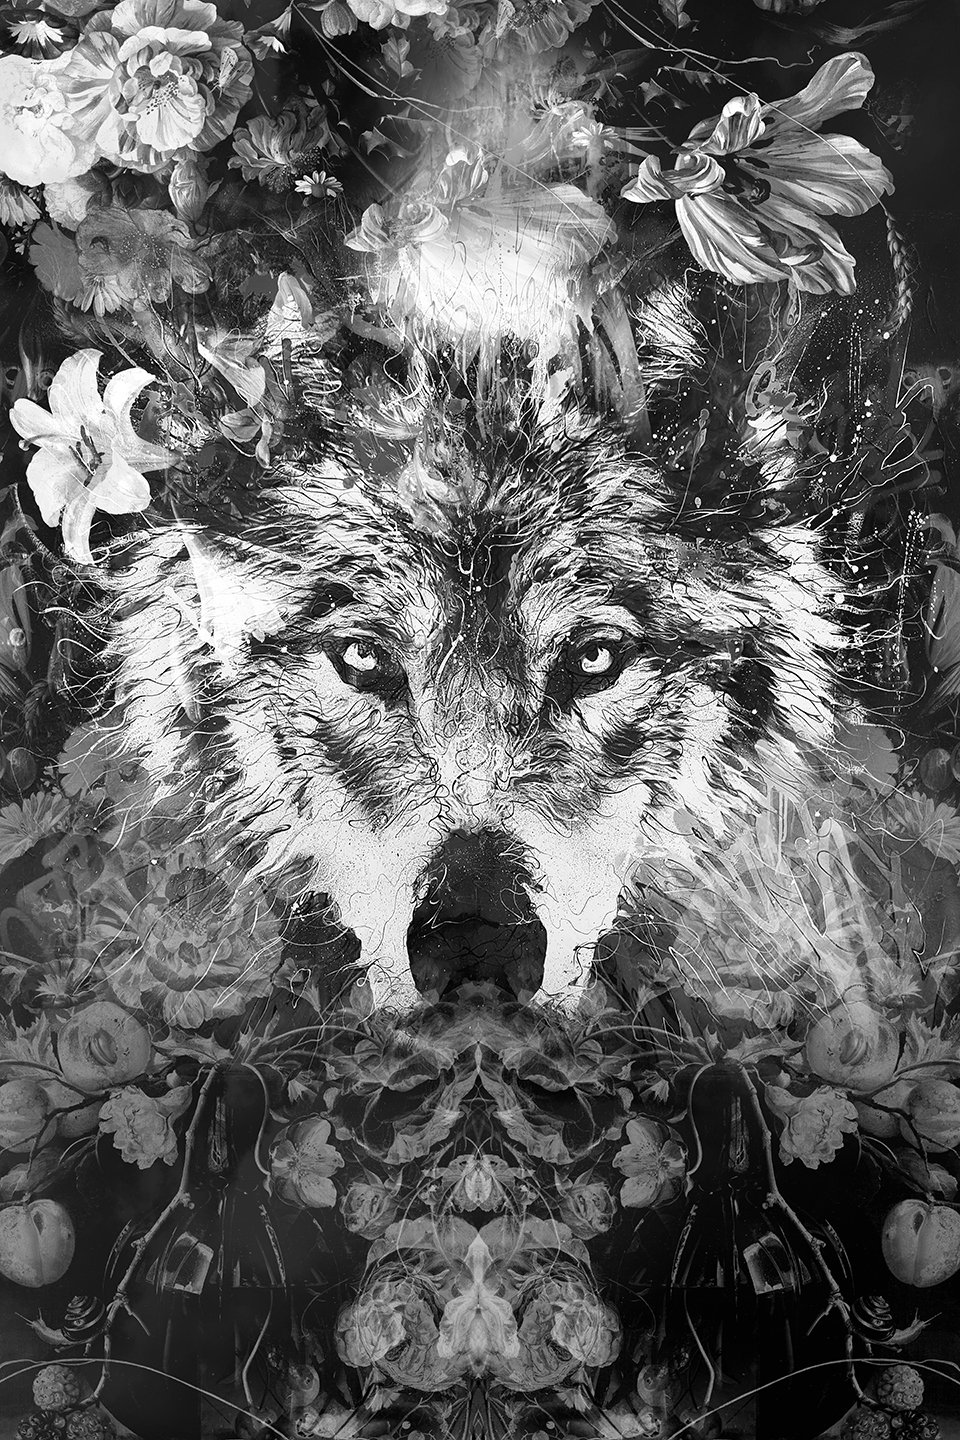 "Wolf" - OPEN EDT PRINT ON PAPER - FREE WORLDWIDE SHIPPING!!!